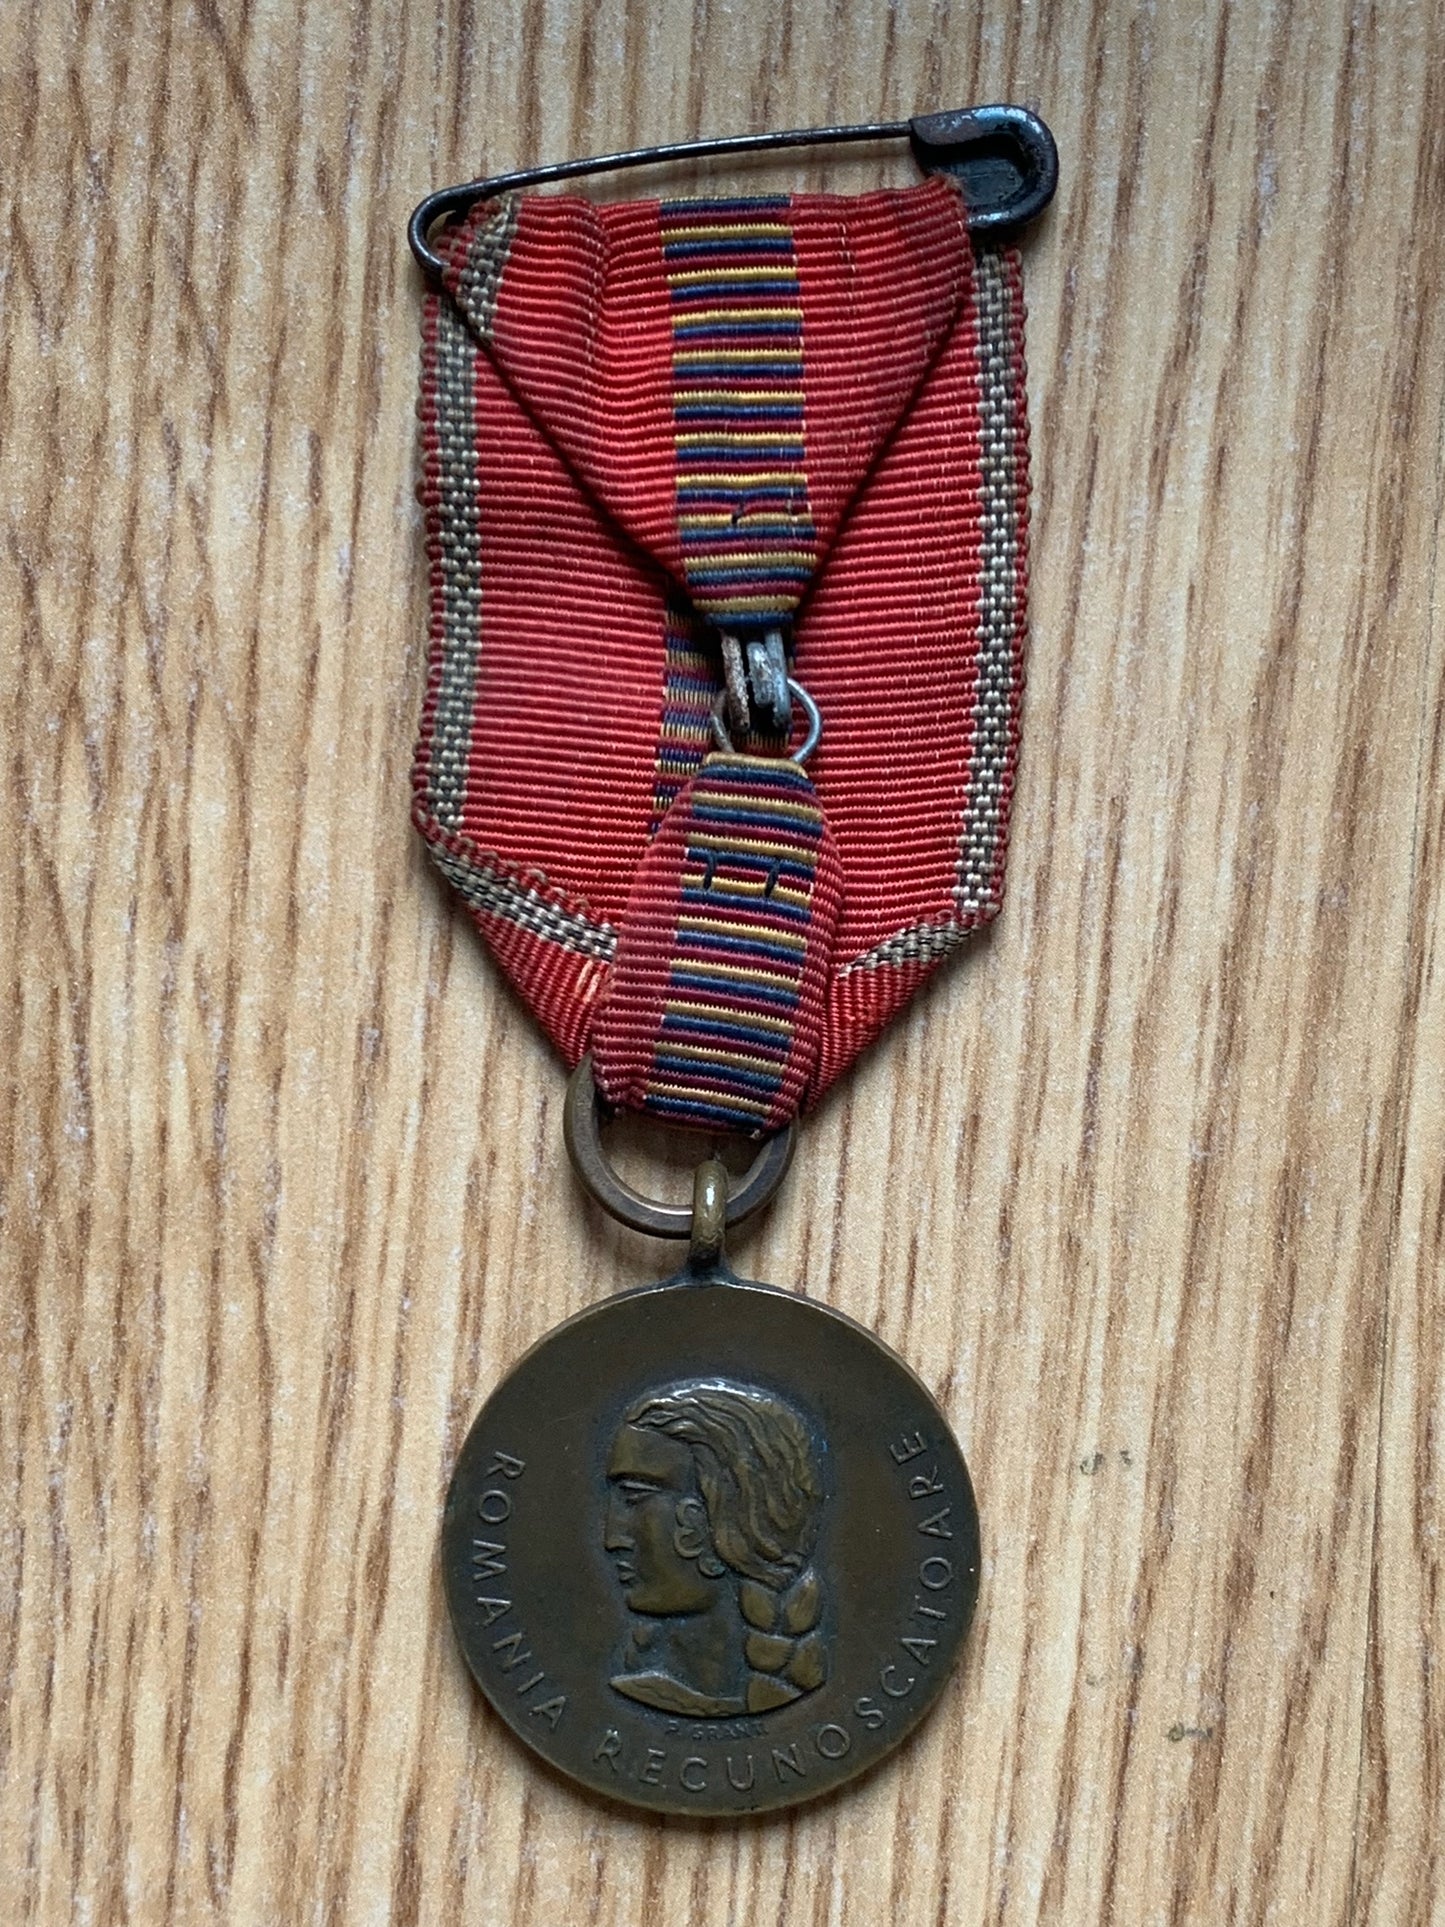 Romanian Eastern front campaign medal